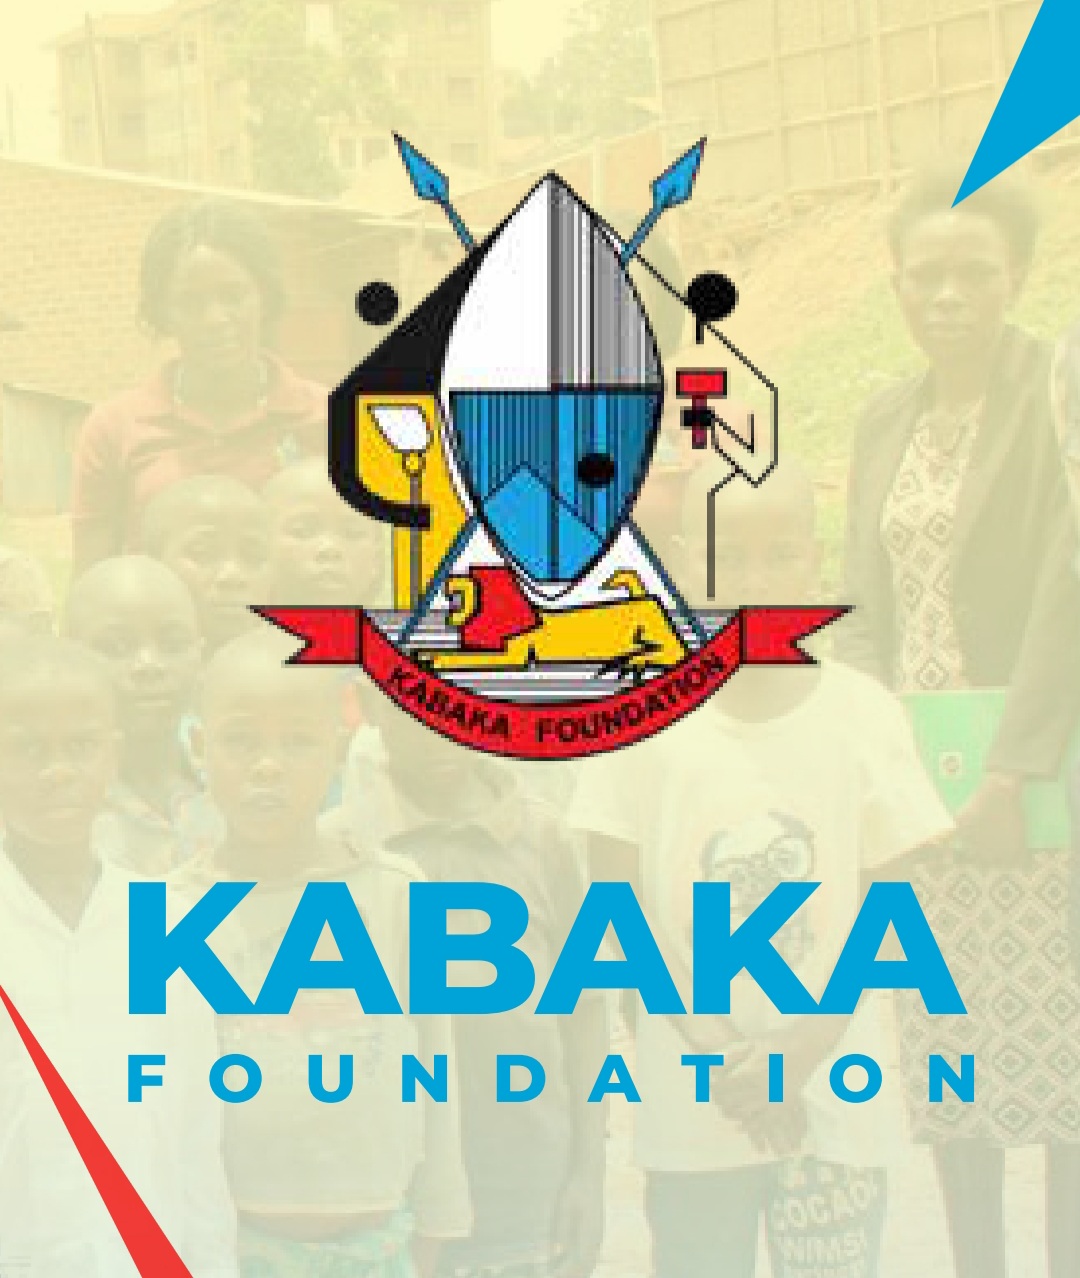 PART 1: Wine, Whisky, Tobacco & Christmas Gifts   PART 2: CHARITY AUCTION for the Kabaka Foundation